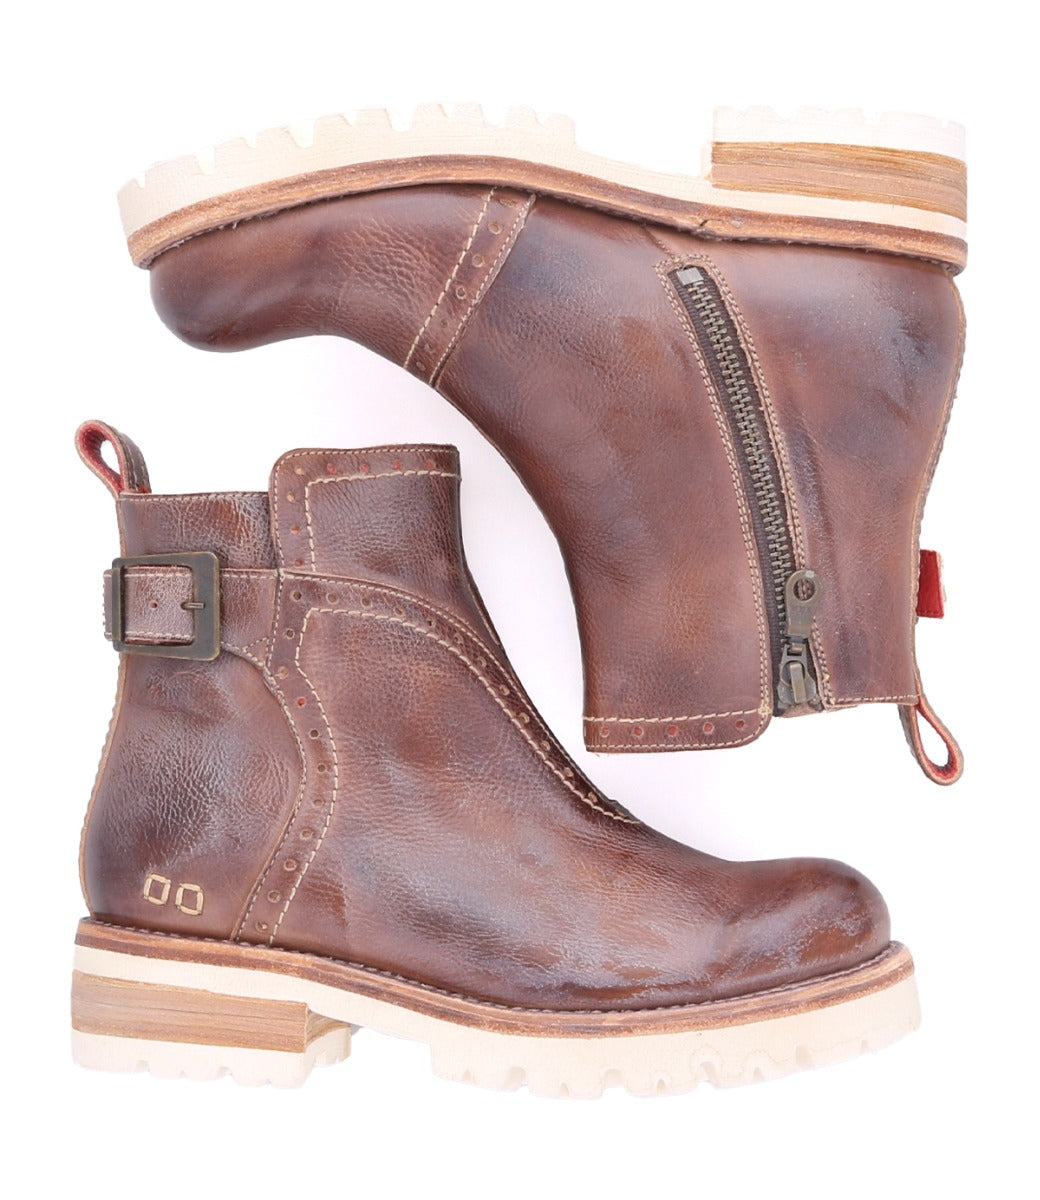 A pair of Brianna boots from Bed Stu, made of brown leather and with zippers on the side.